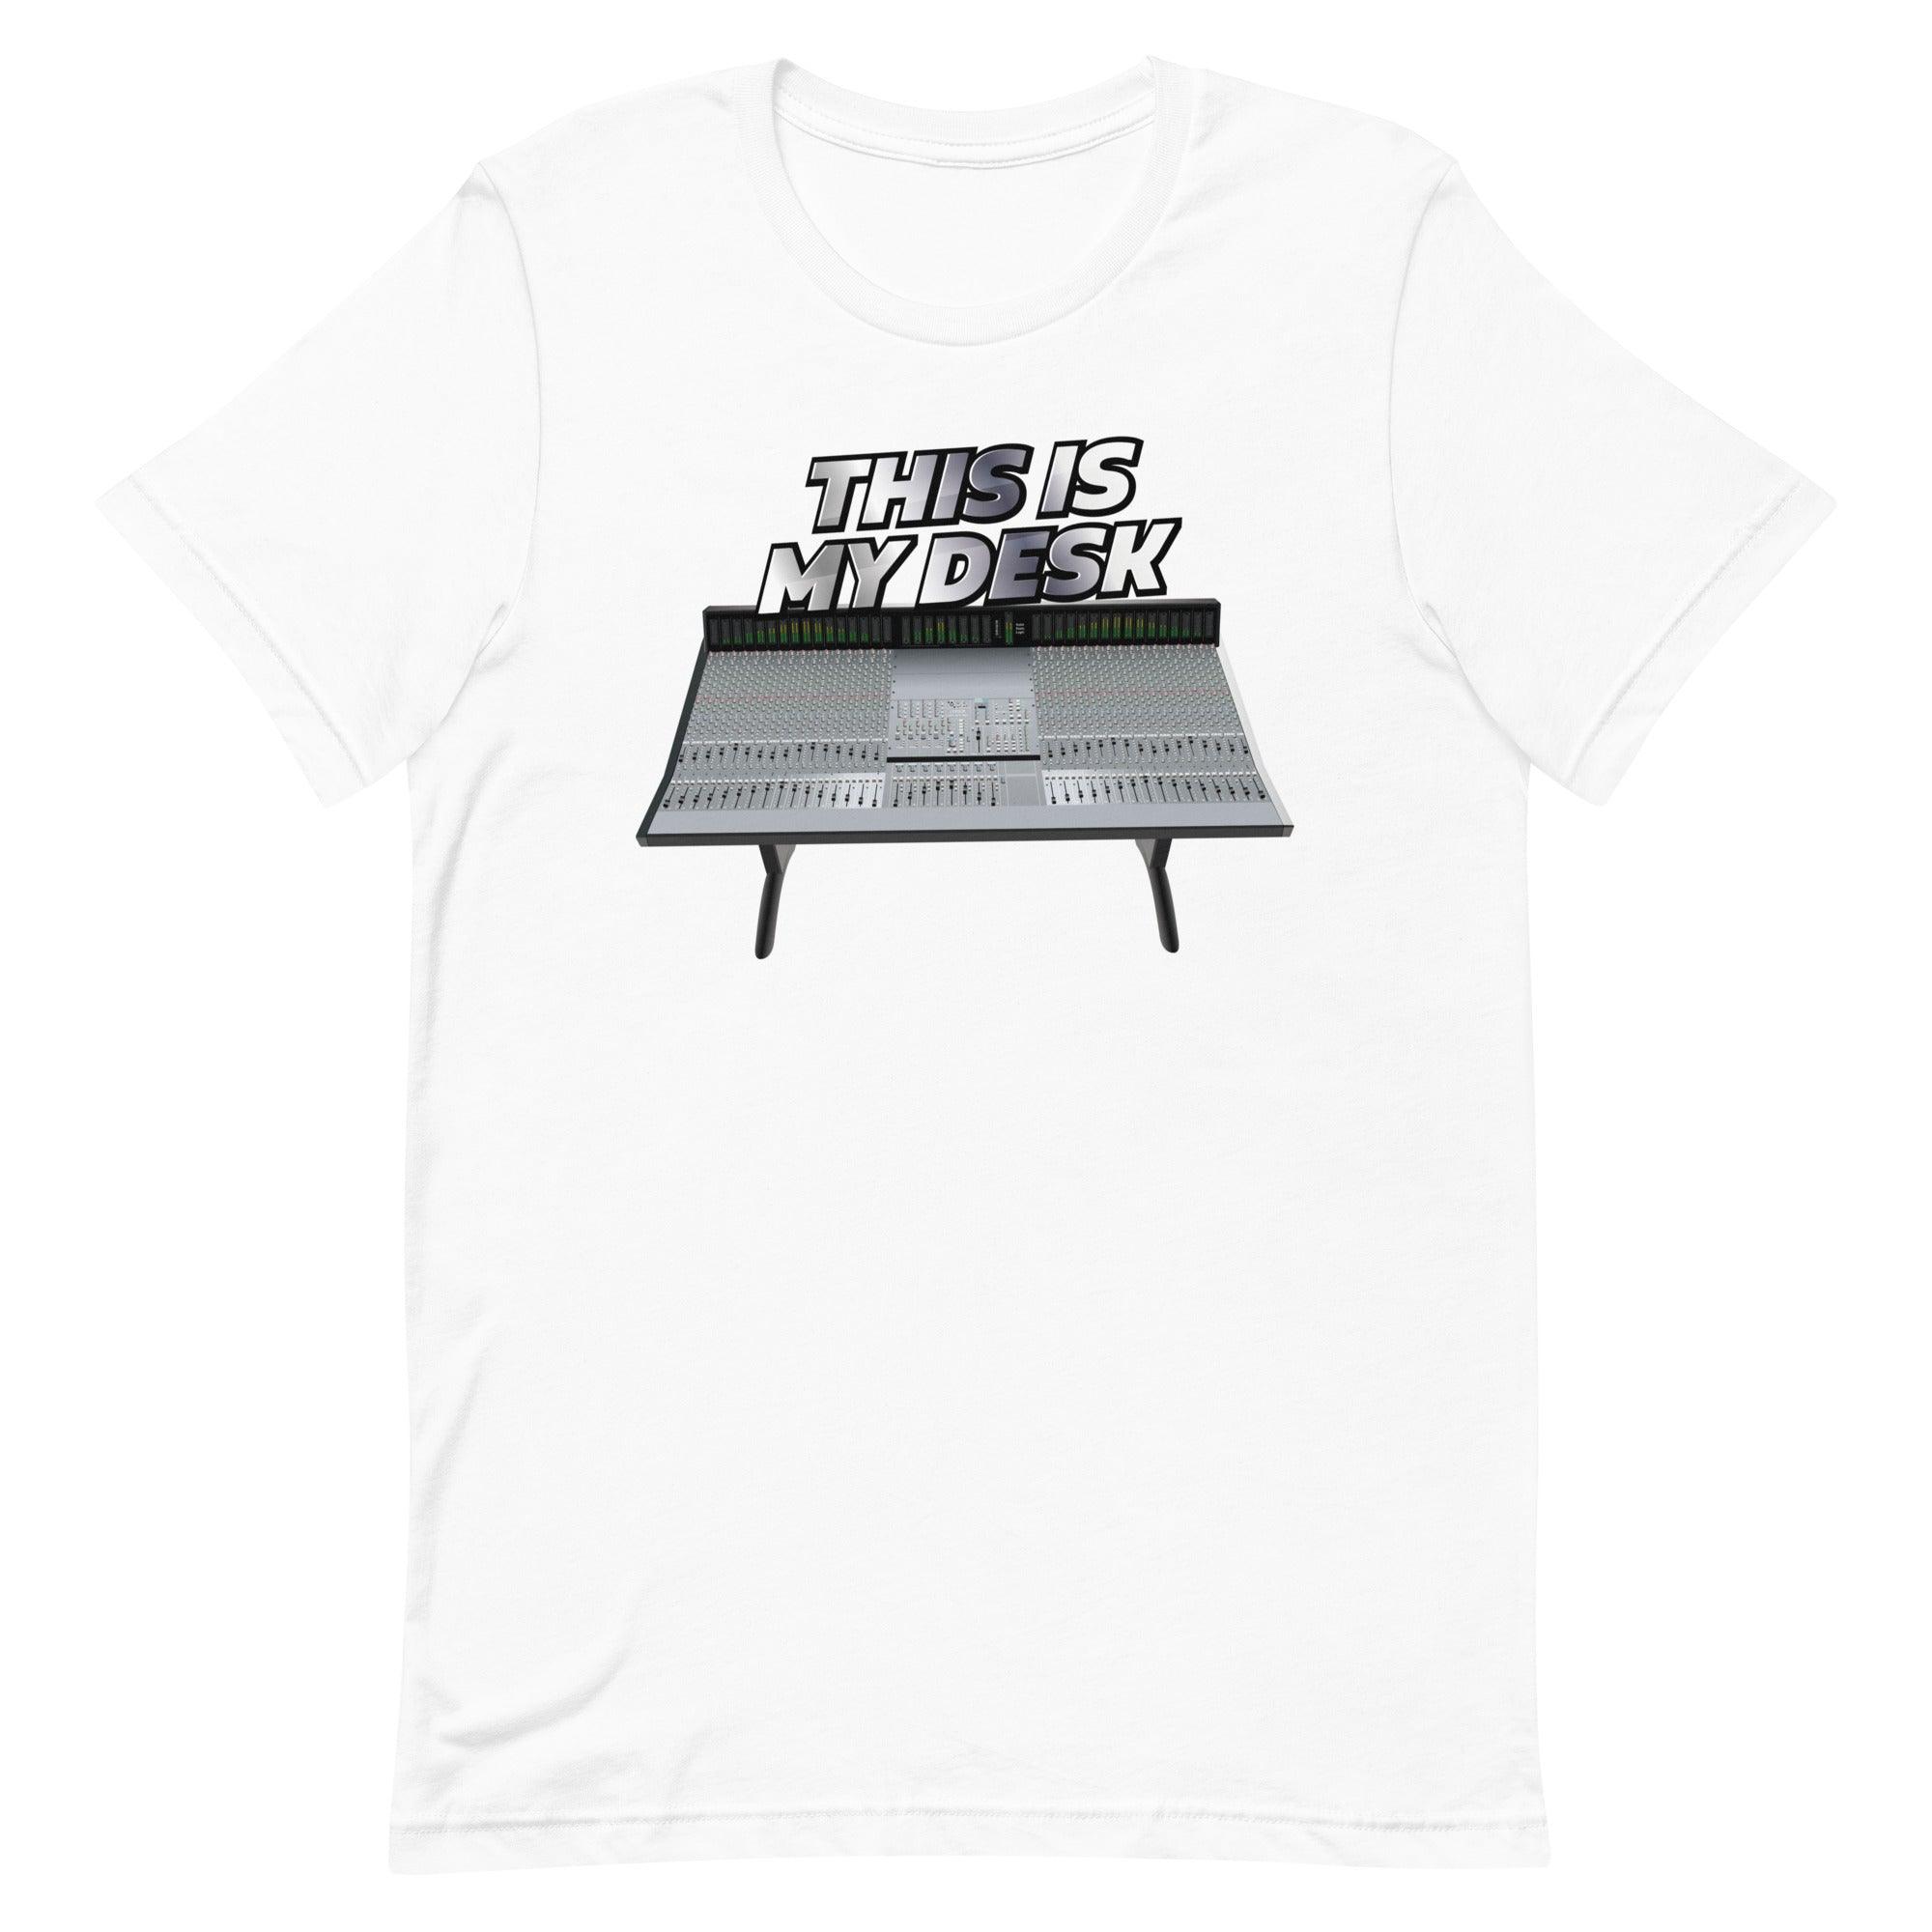 Solid State Logic® Inspired Design | Mixing Console | SSL "This Is My Desk" Unisex T-Shirt (XS-5XL) - Tedeschi Studio, LLC.